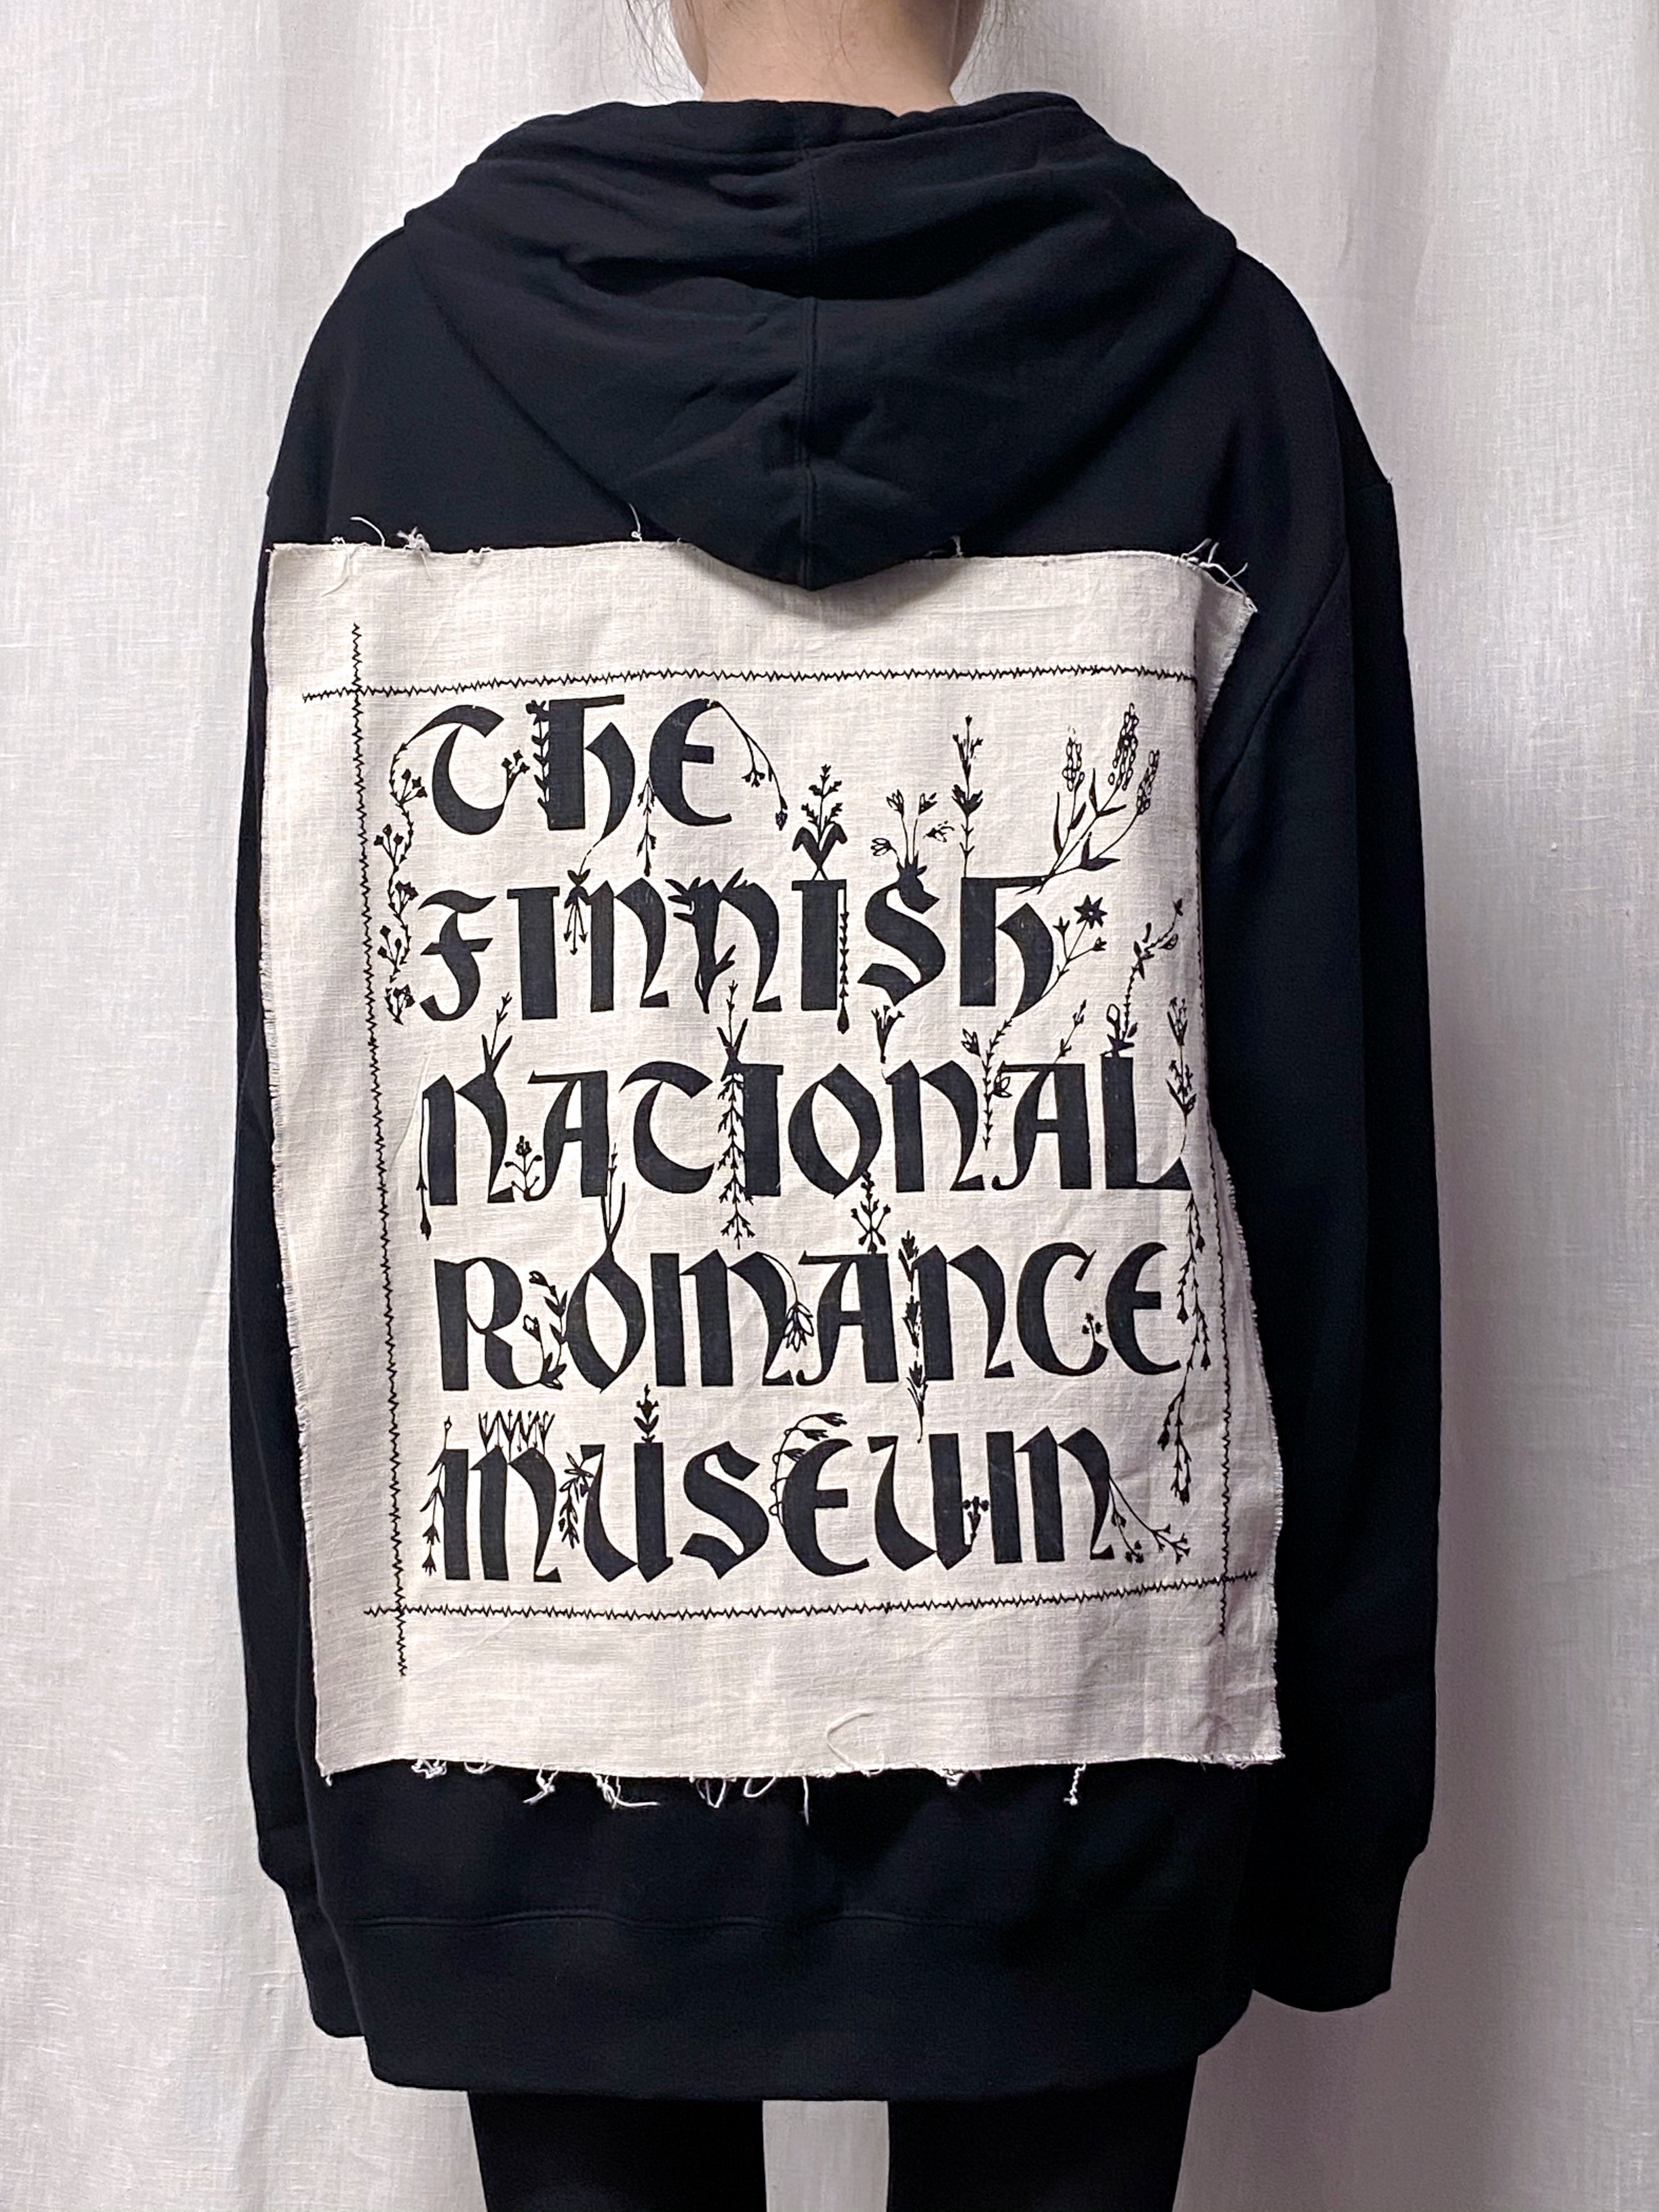 The Finnish National Romance Museum creates ready to wear pieces inspired by Finnish nature, history and culture. The FNRM Museo hoodie, black